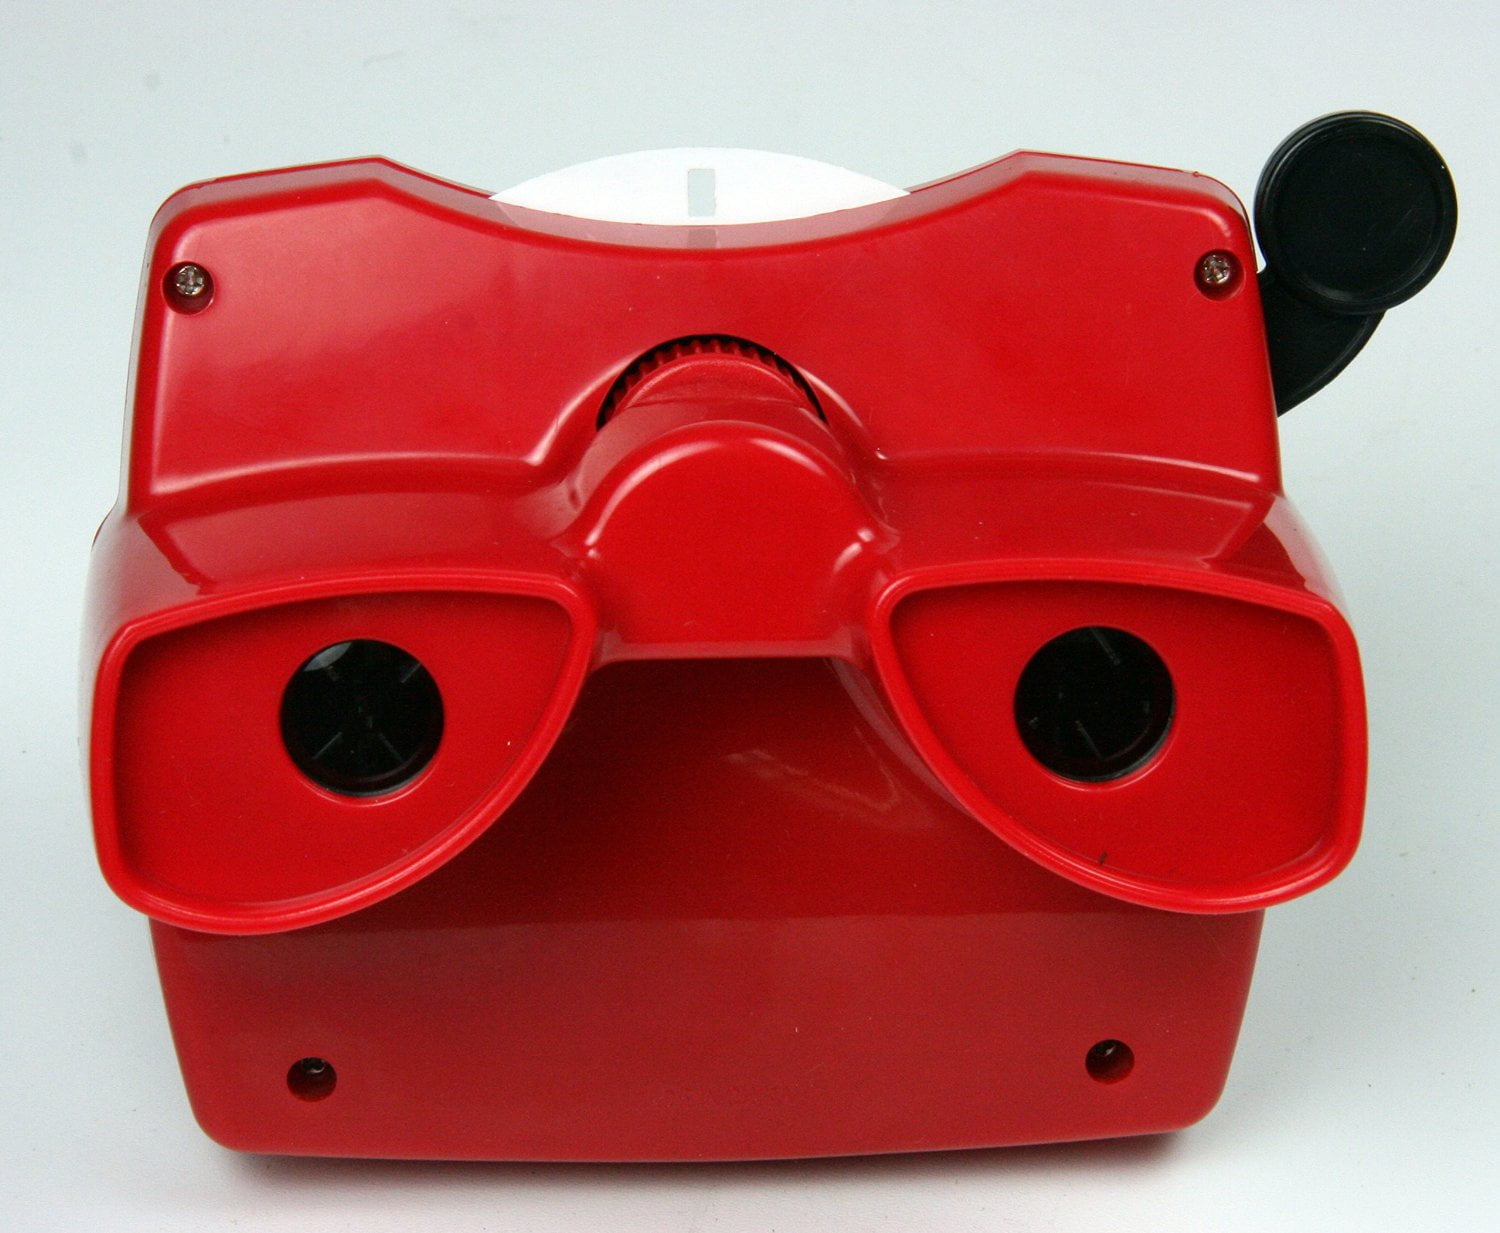 3dstereo viewmaster 3d reel viewfinder focusing Mauritius